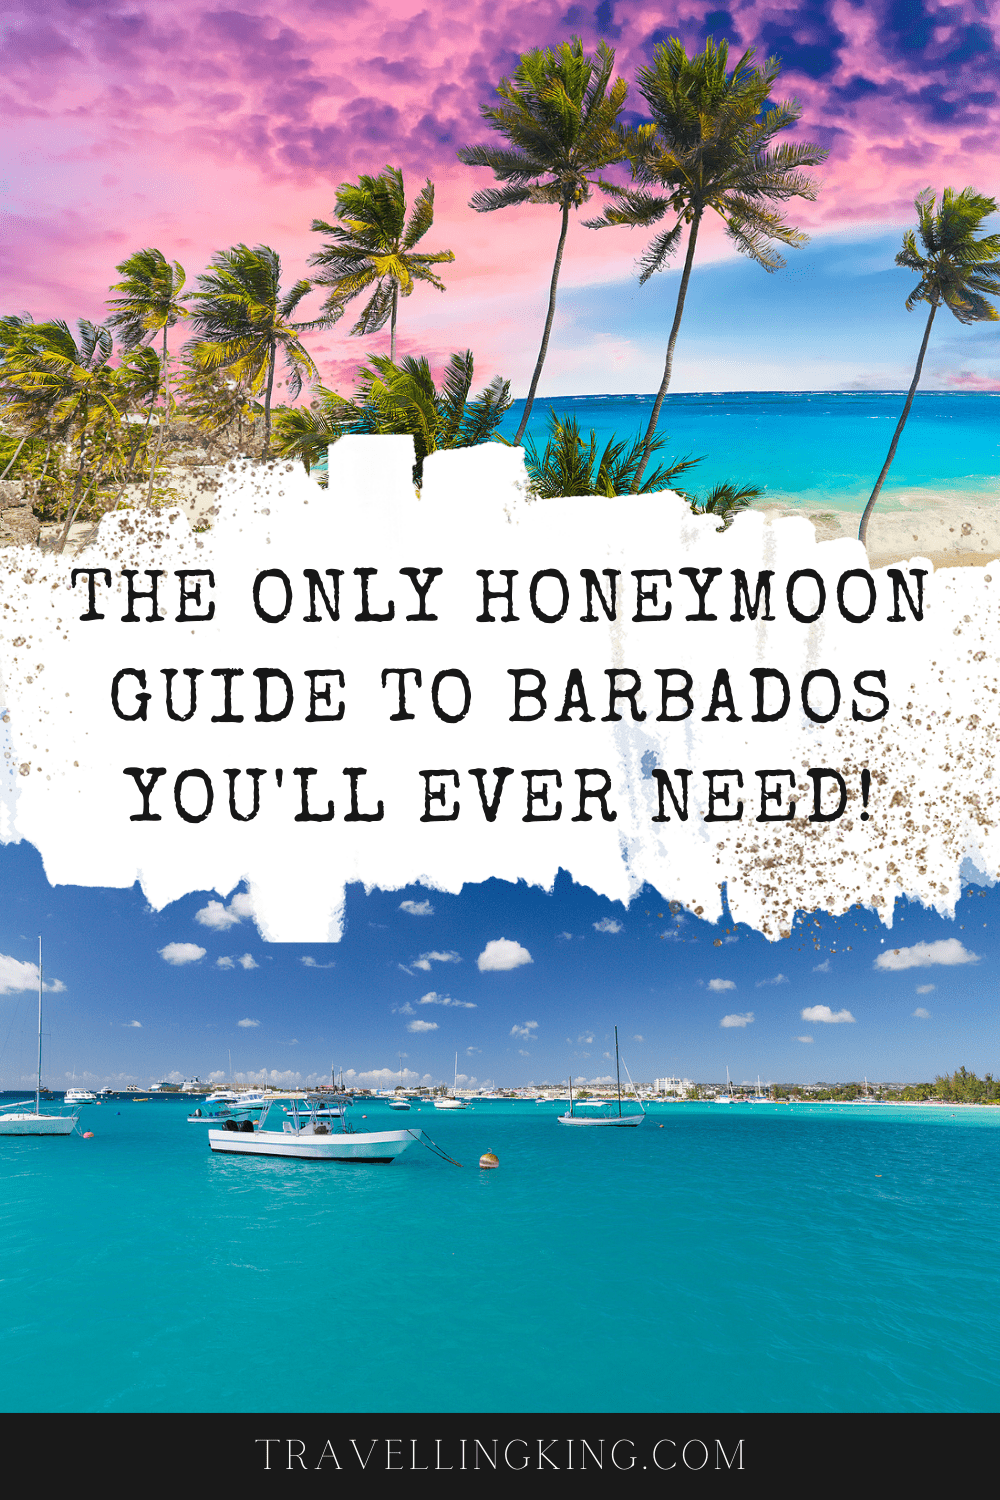 The Only Honeymoon Guide to Barbados You'll Ever Need!